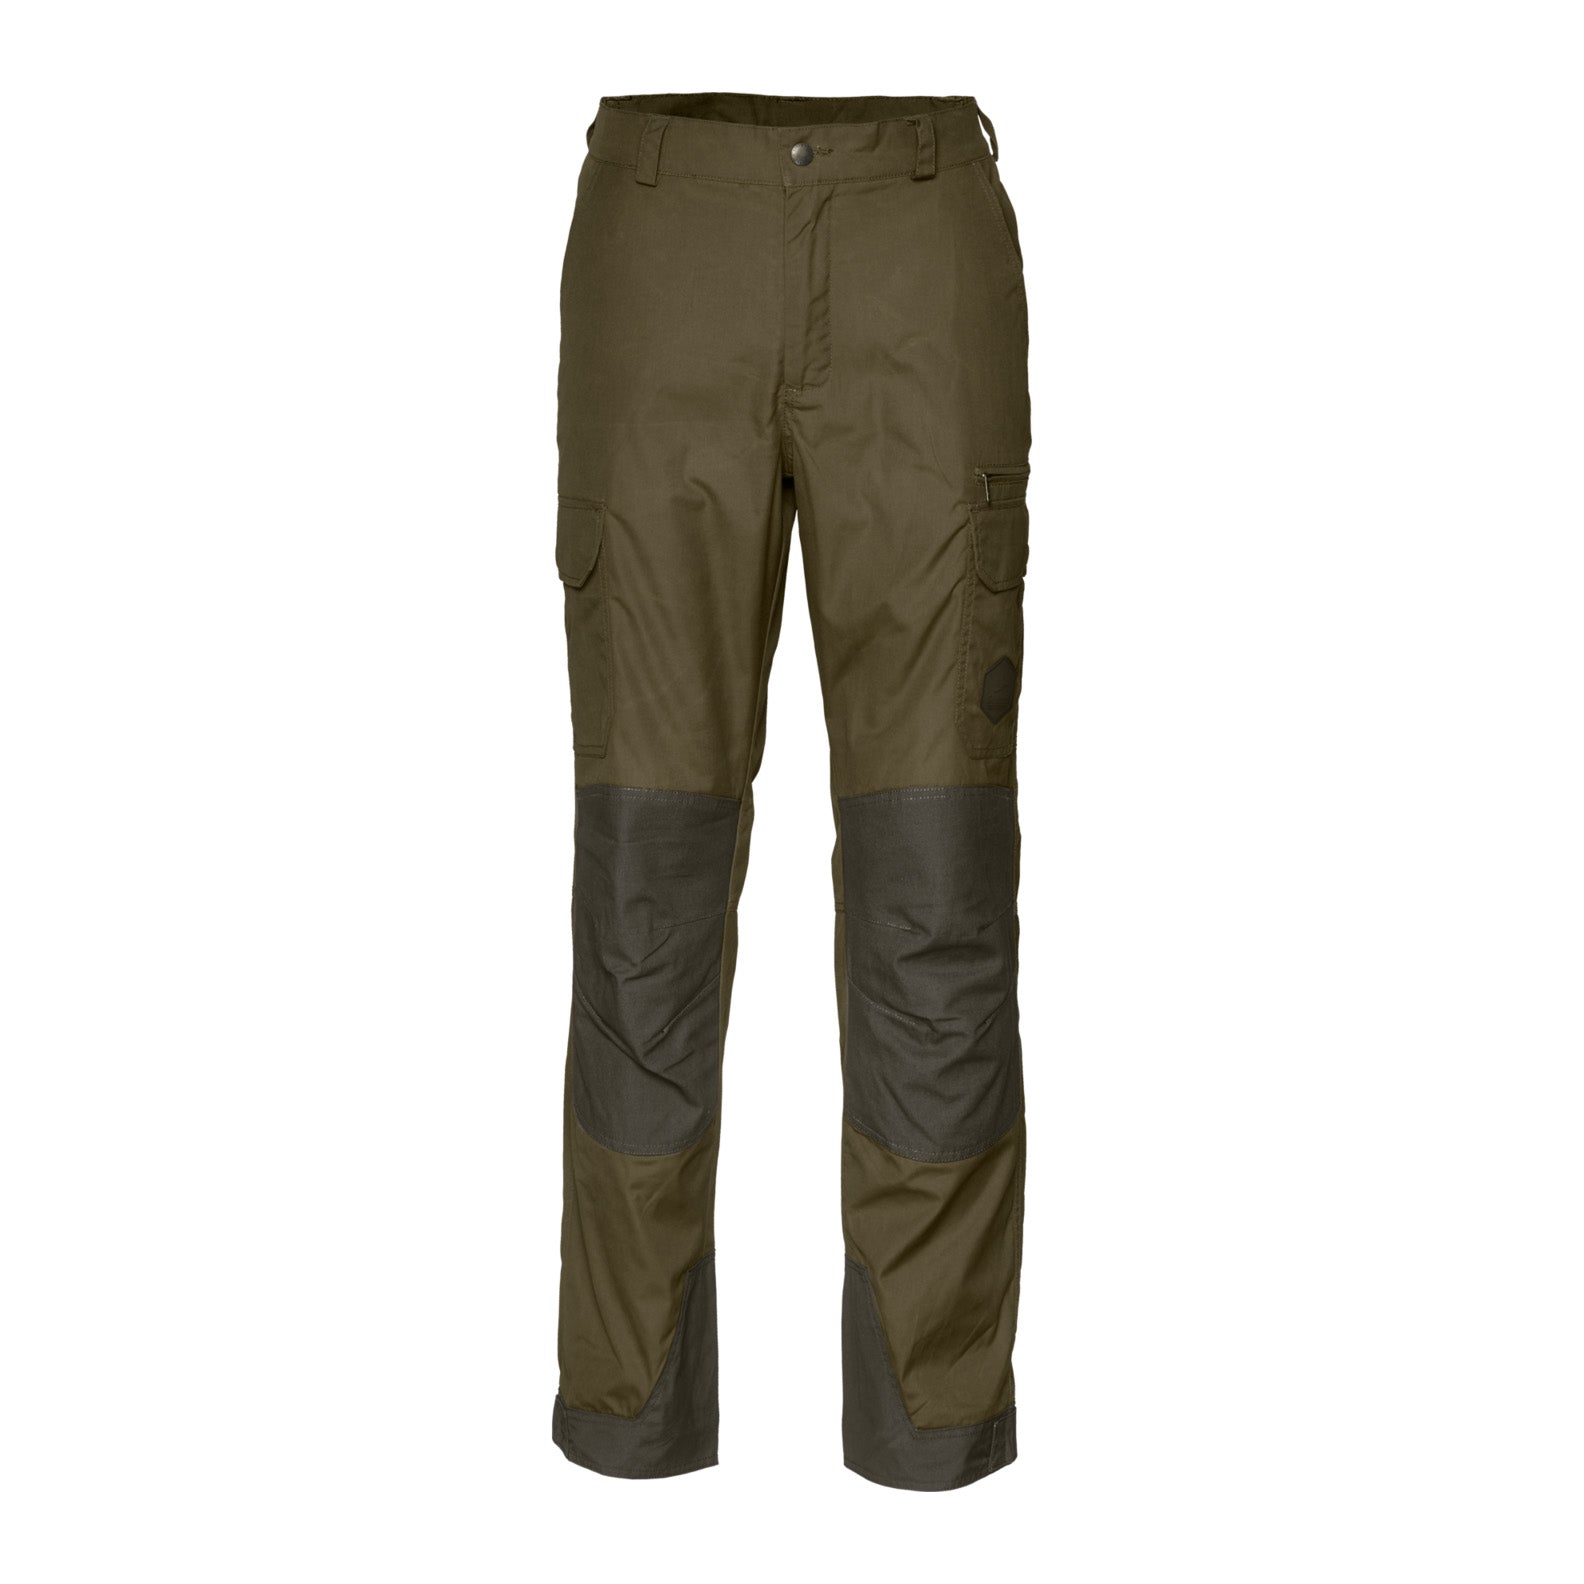 Seeland-Key-Point-Reinforced-Shooting-Trousers